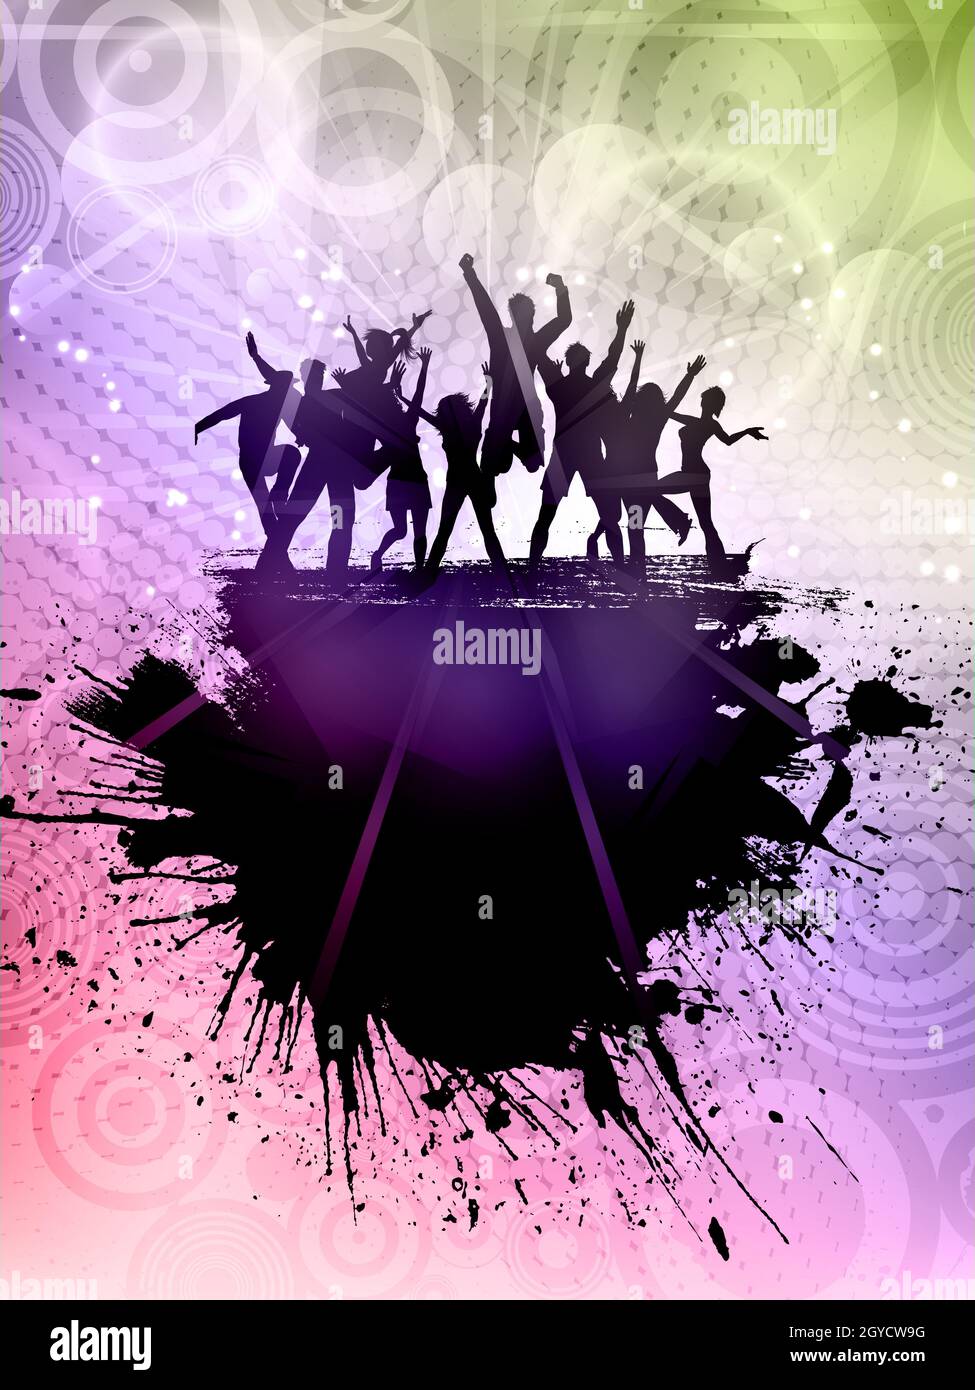 Silhouette of a grunge party crowd on an abstract background Stock Photo